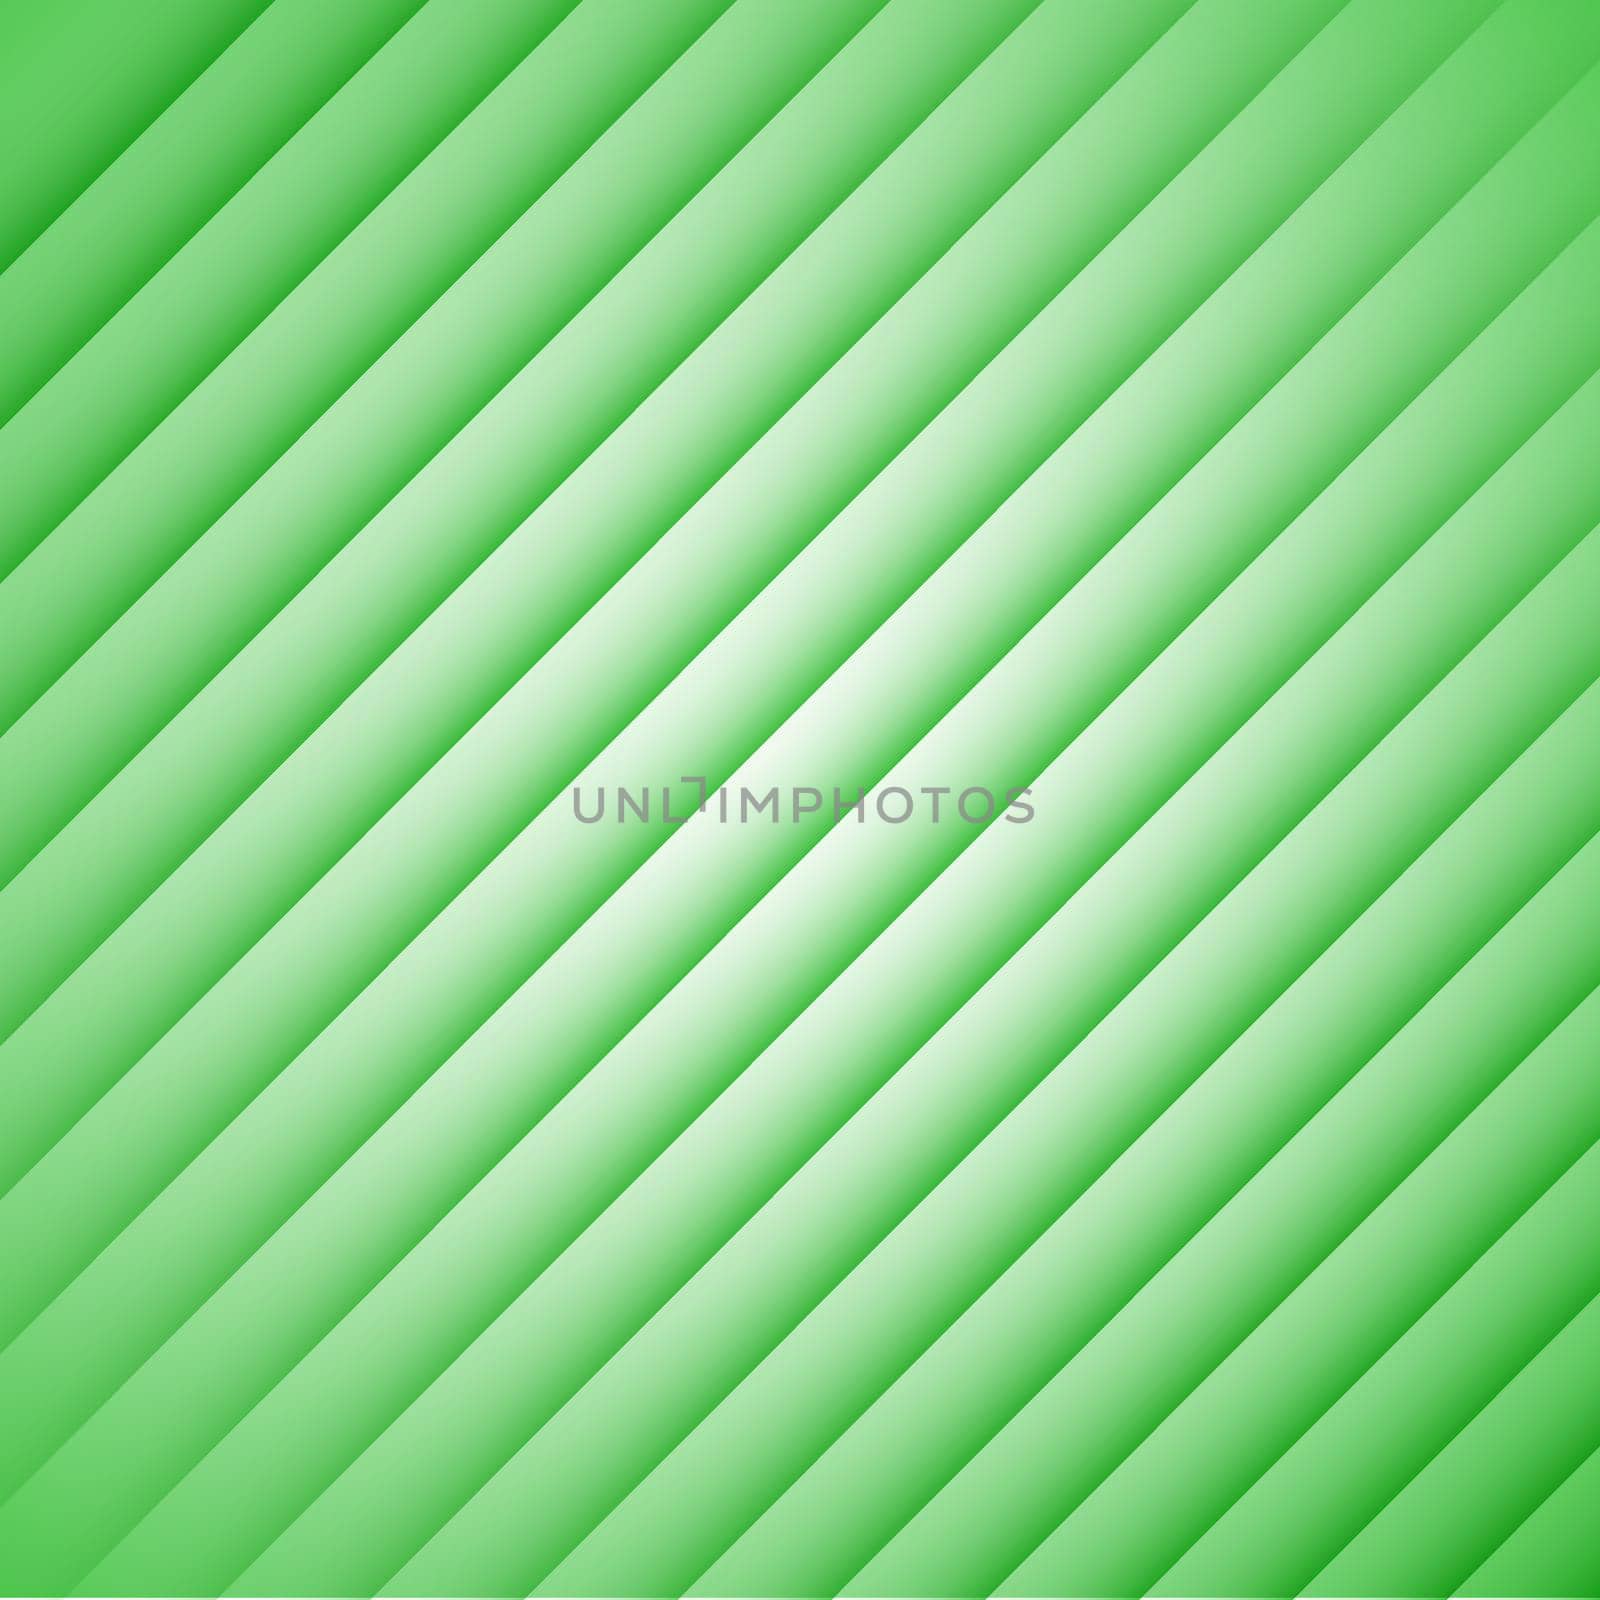 Abstract green stripes on a white background.